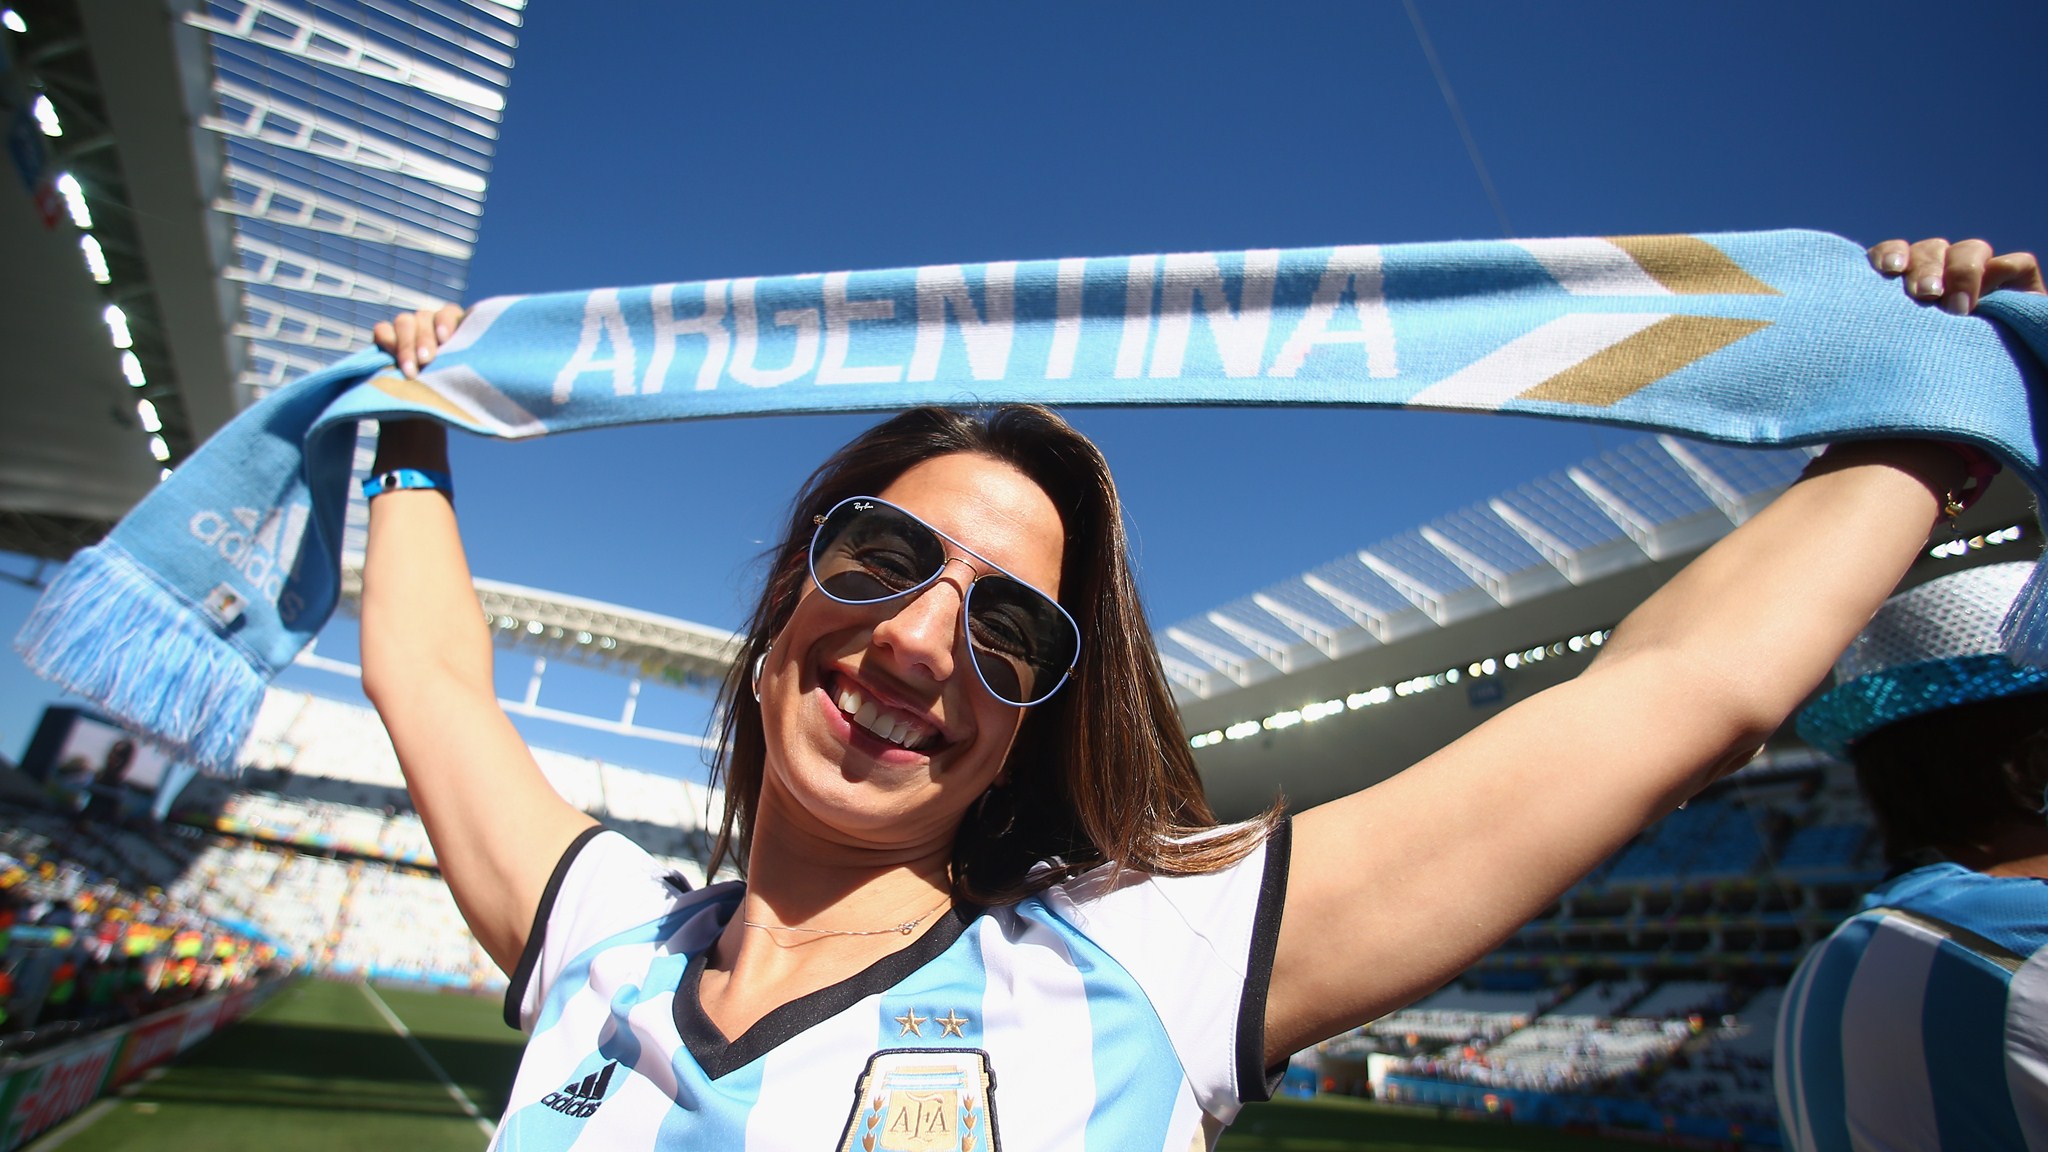 143 - Argentina-Switzerland [1-0 - Win after extra time ] -- 01 Jul 2014 - 13-00